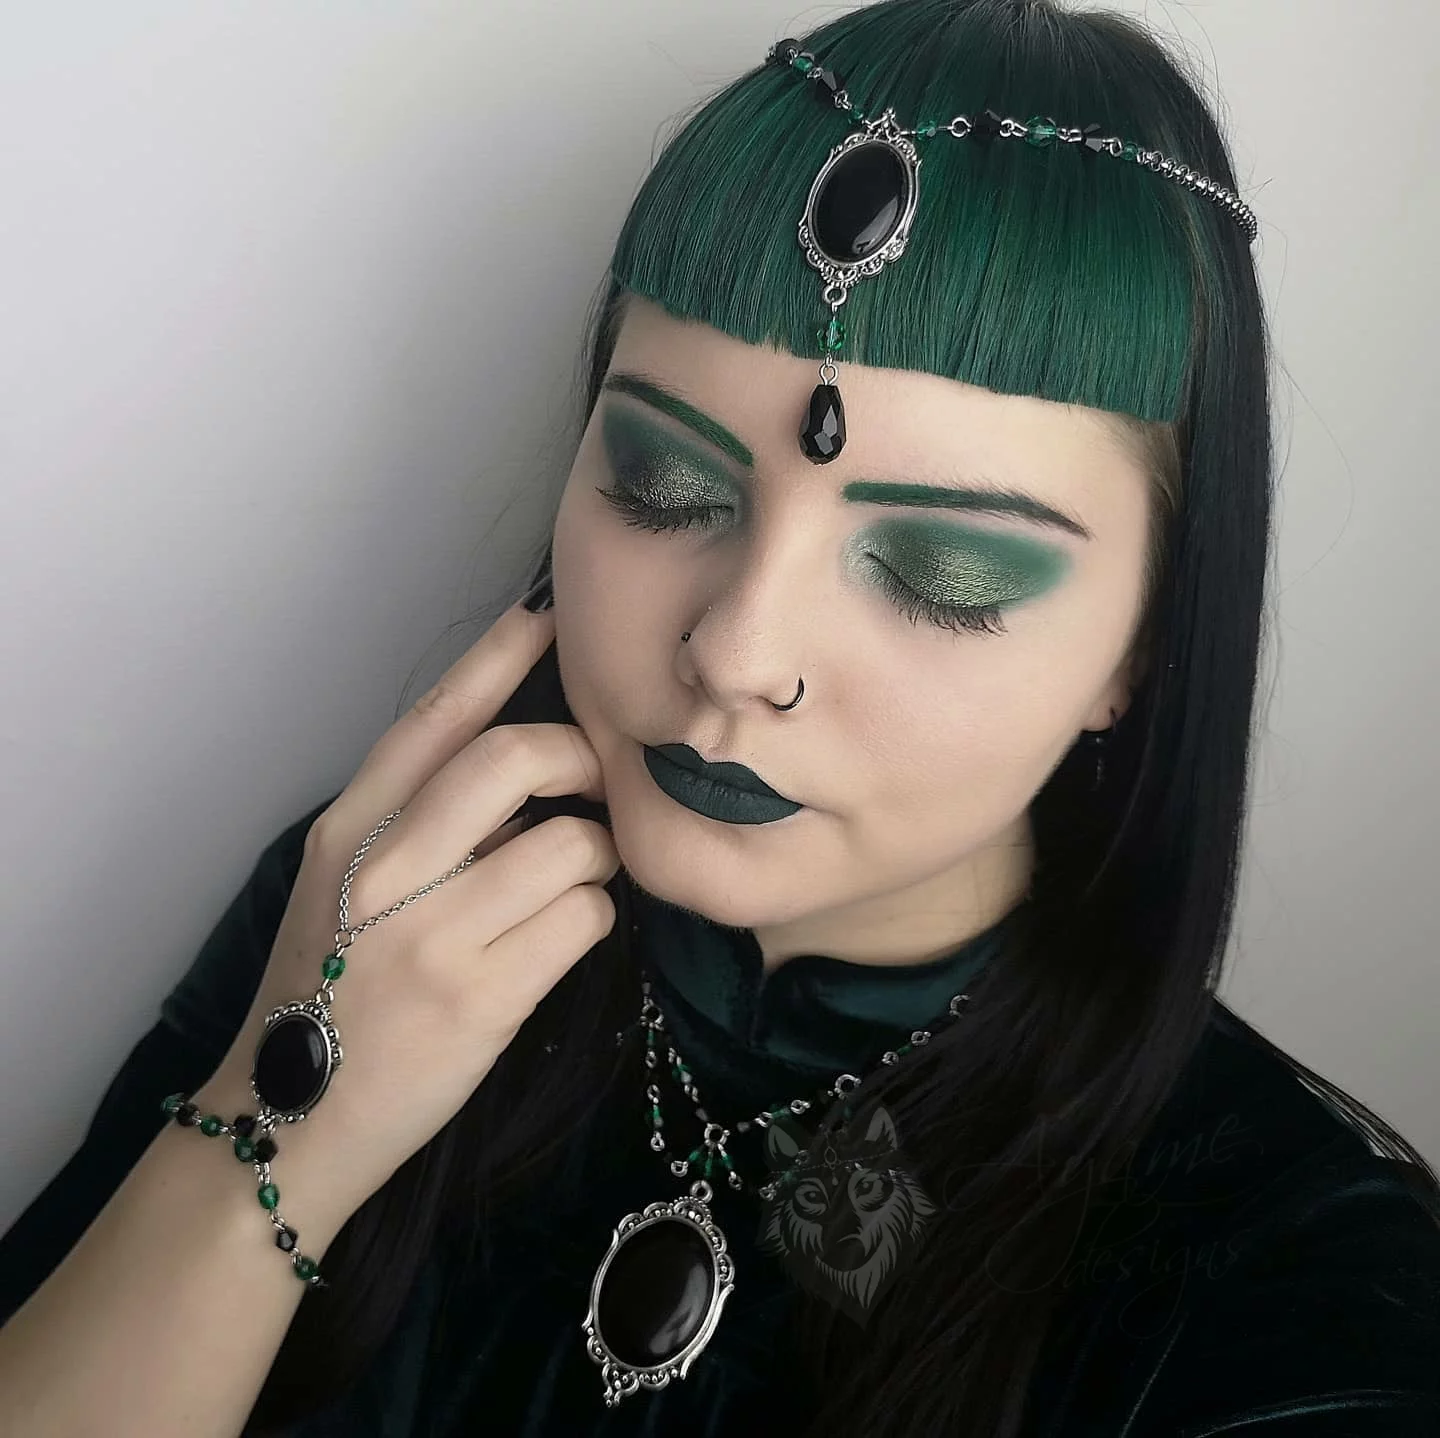 Handmade gothic jewellery set with black resin cameos in filigree frames, green Czech crystal beads and black Austrian crystal beads